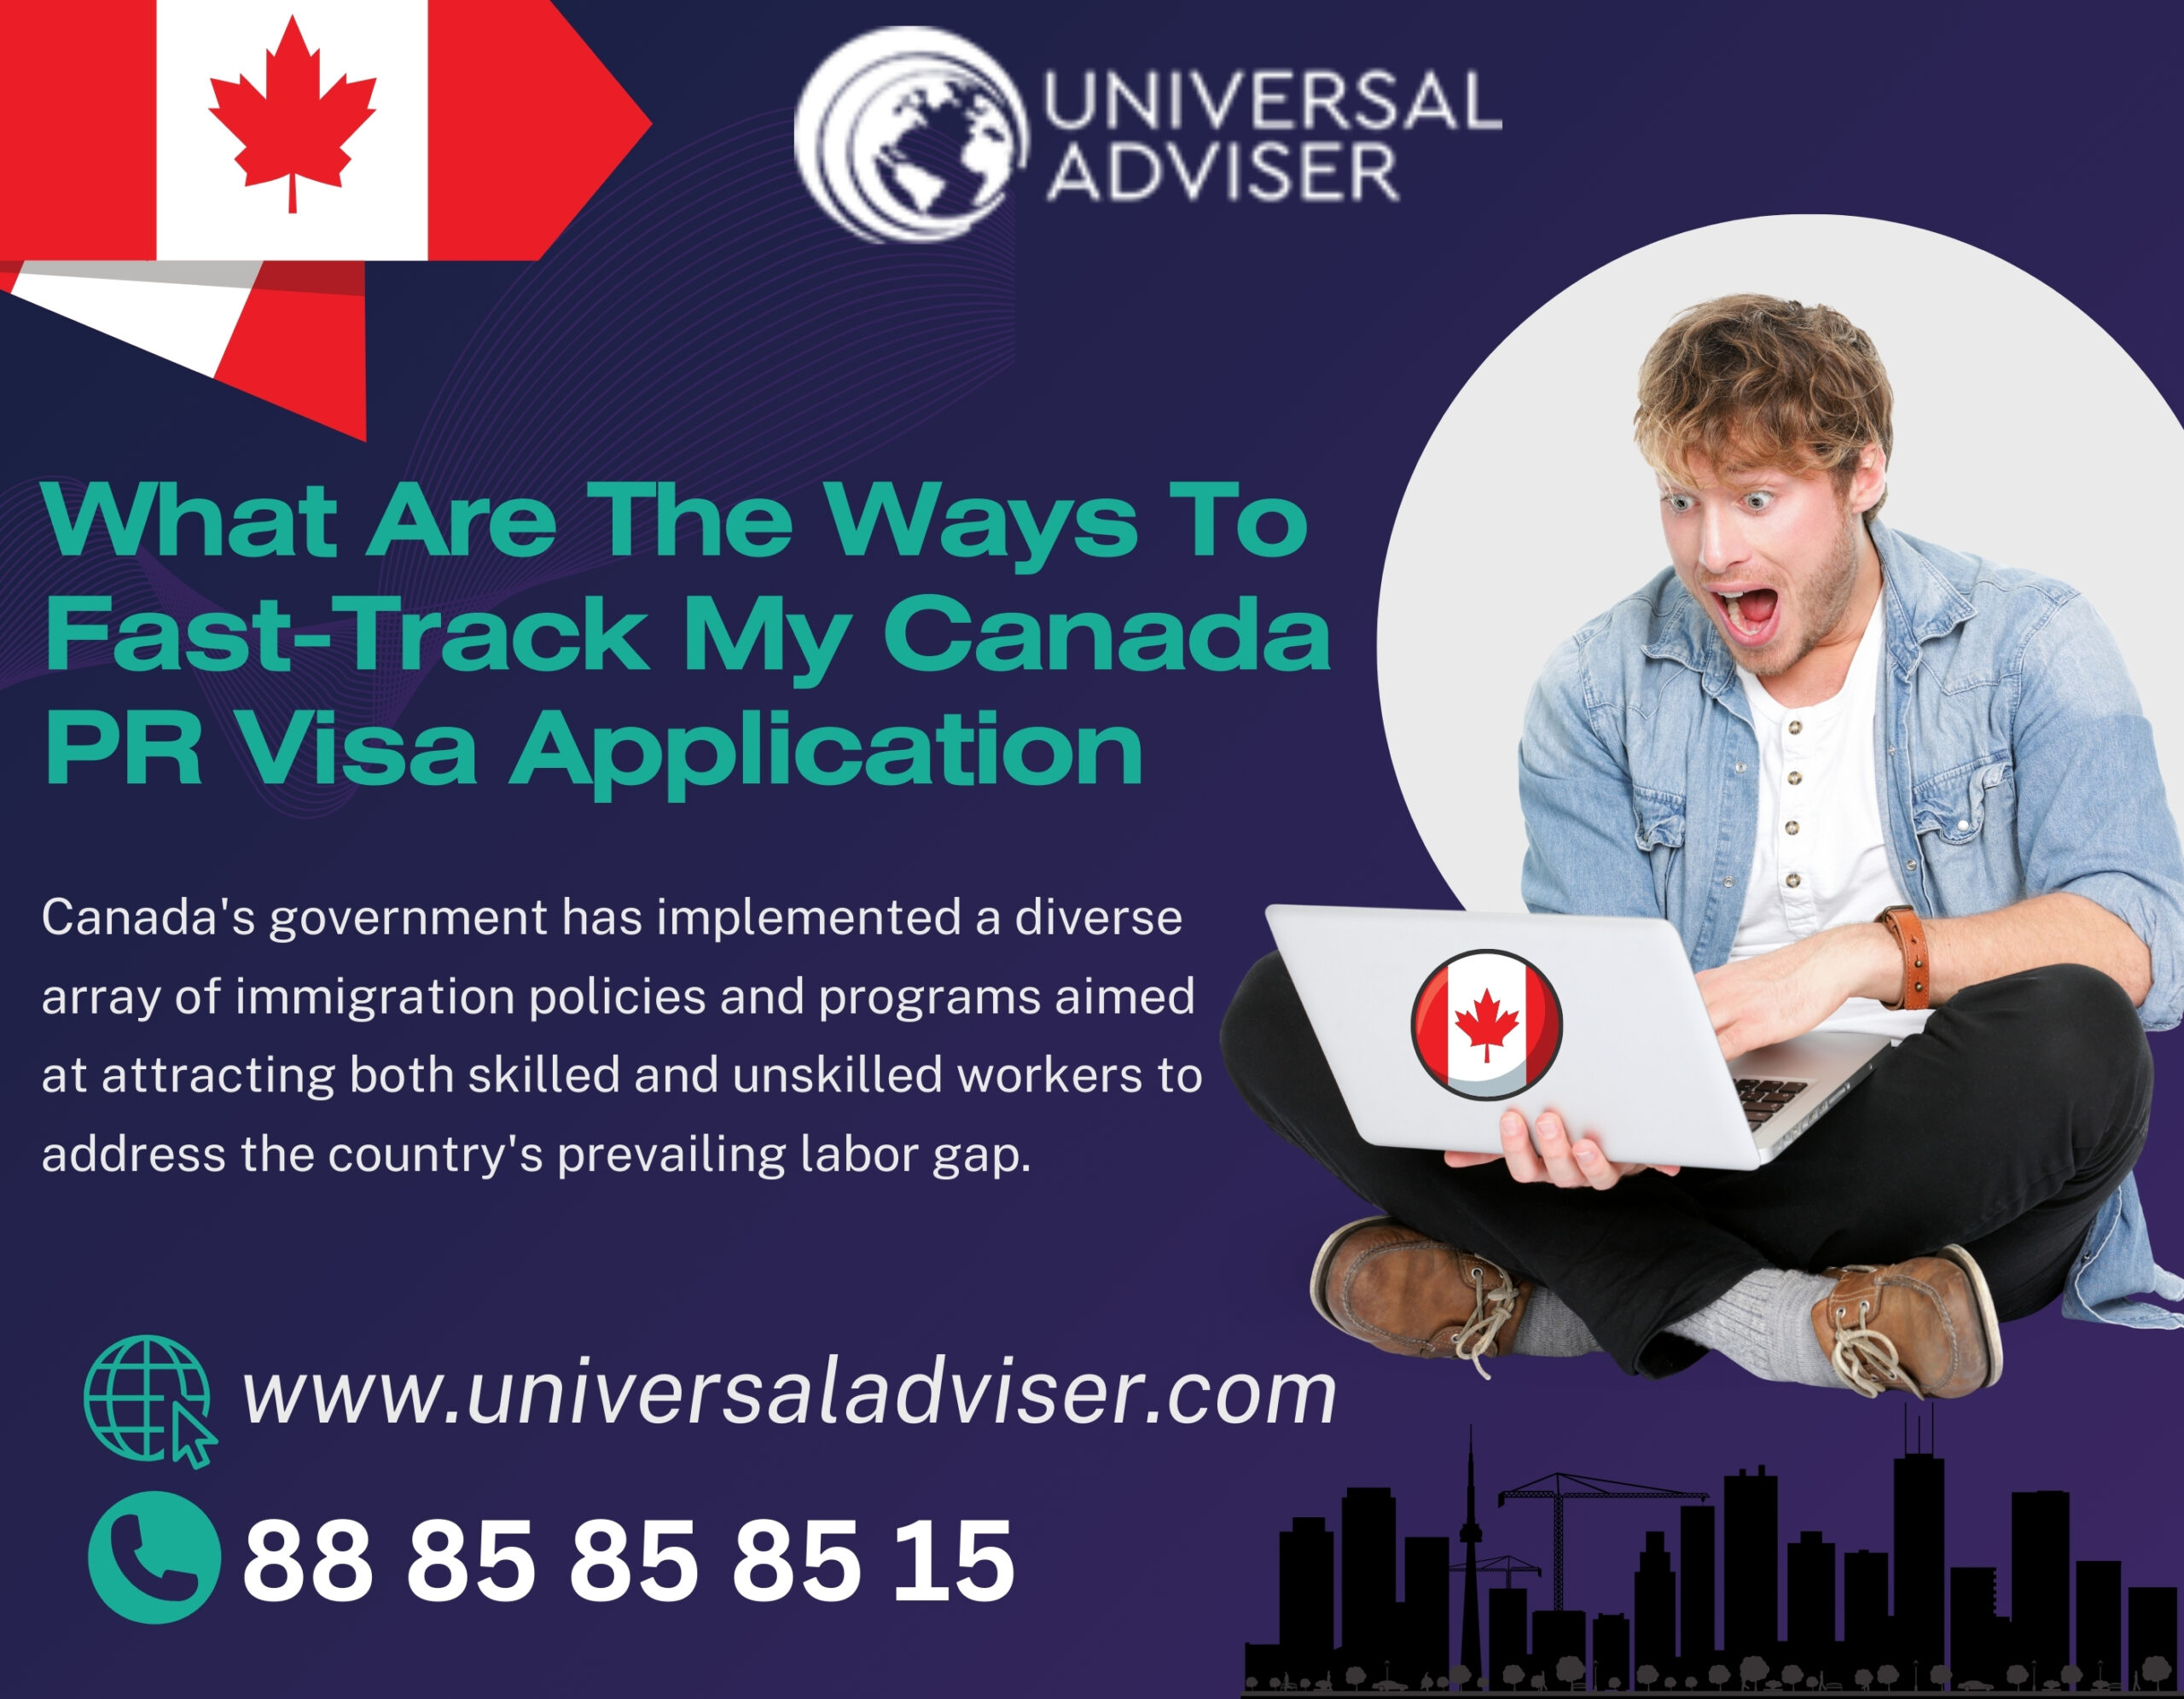 What Are the Ways to Fast-Track My Canada PR Visa Application